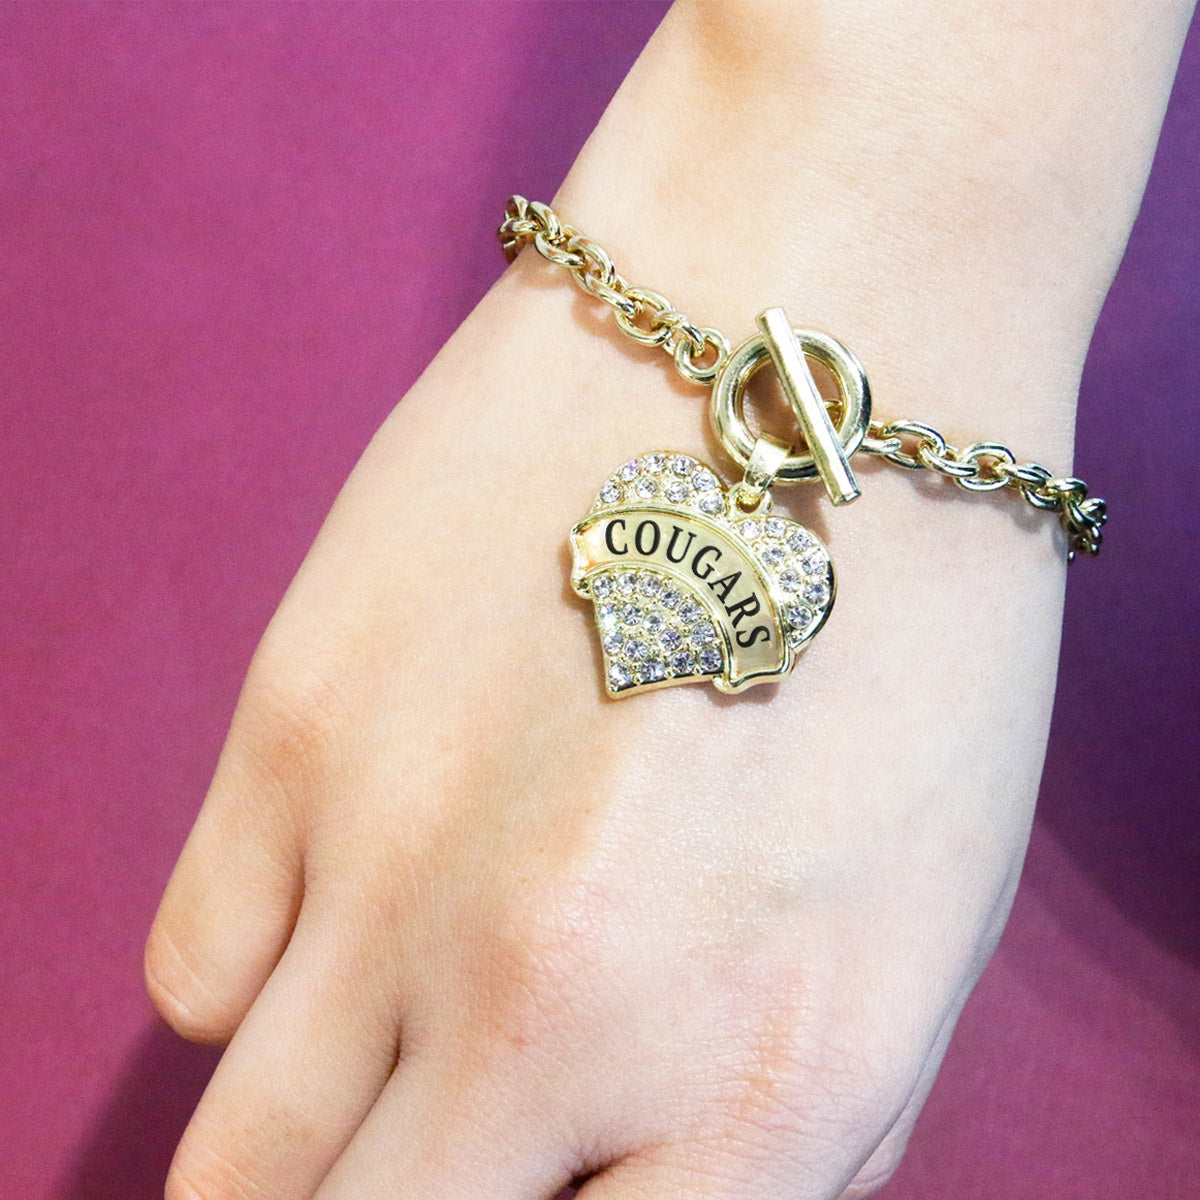 Gold Cougars Pave Heart Charm Toggle Bracelet